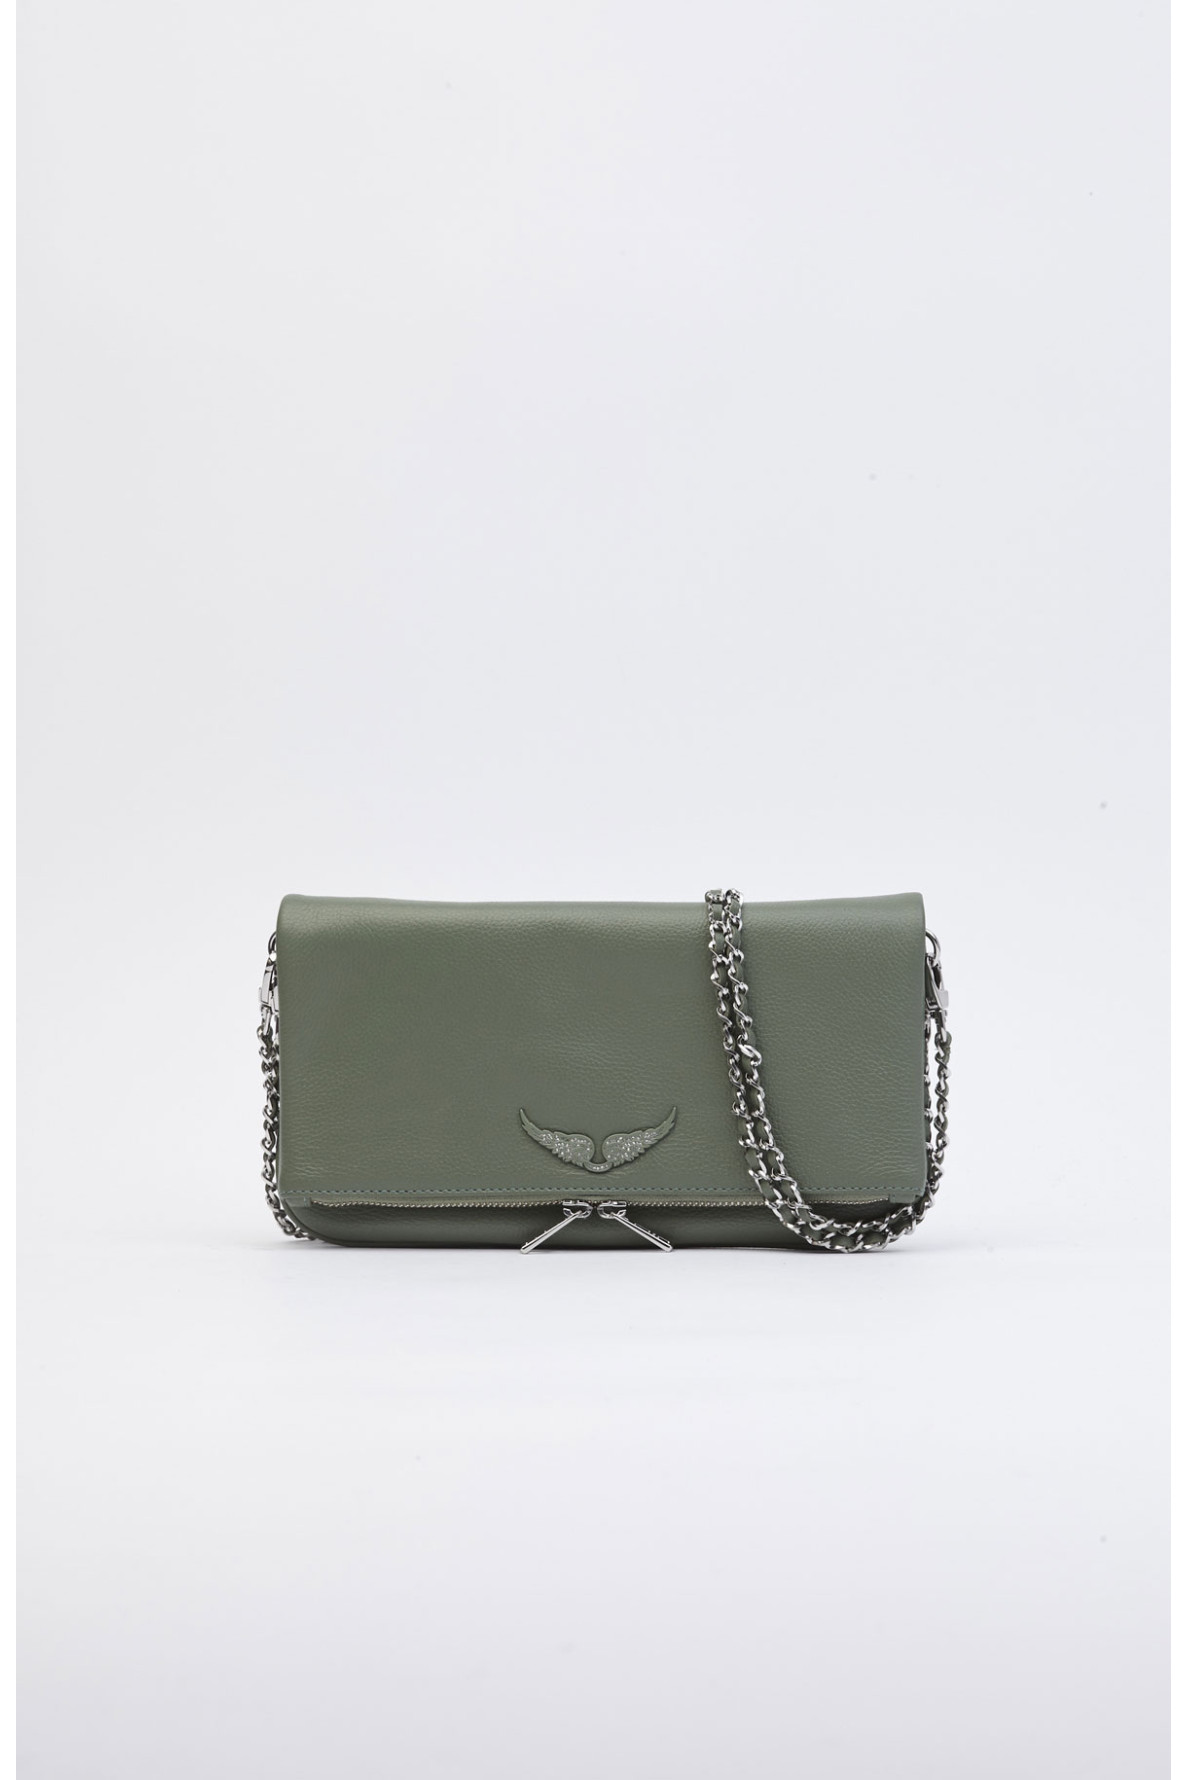 Rock grained leather bag - 13